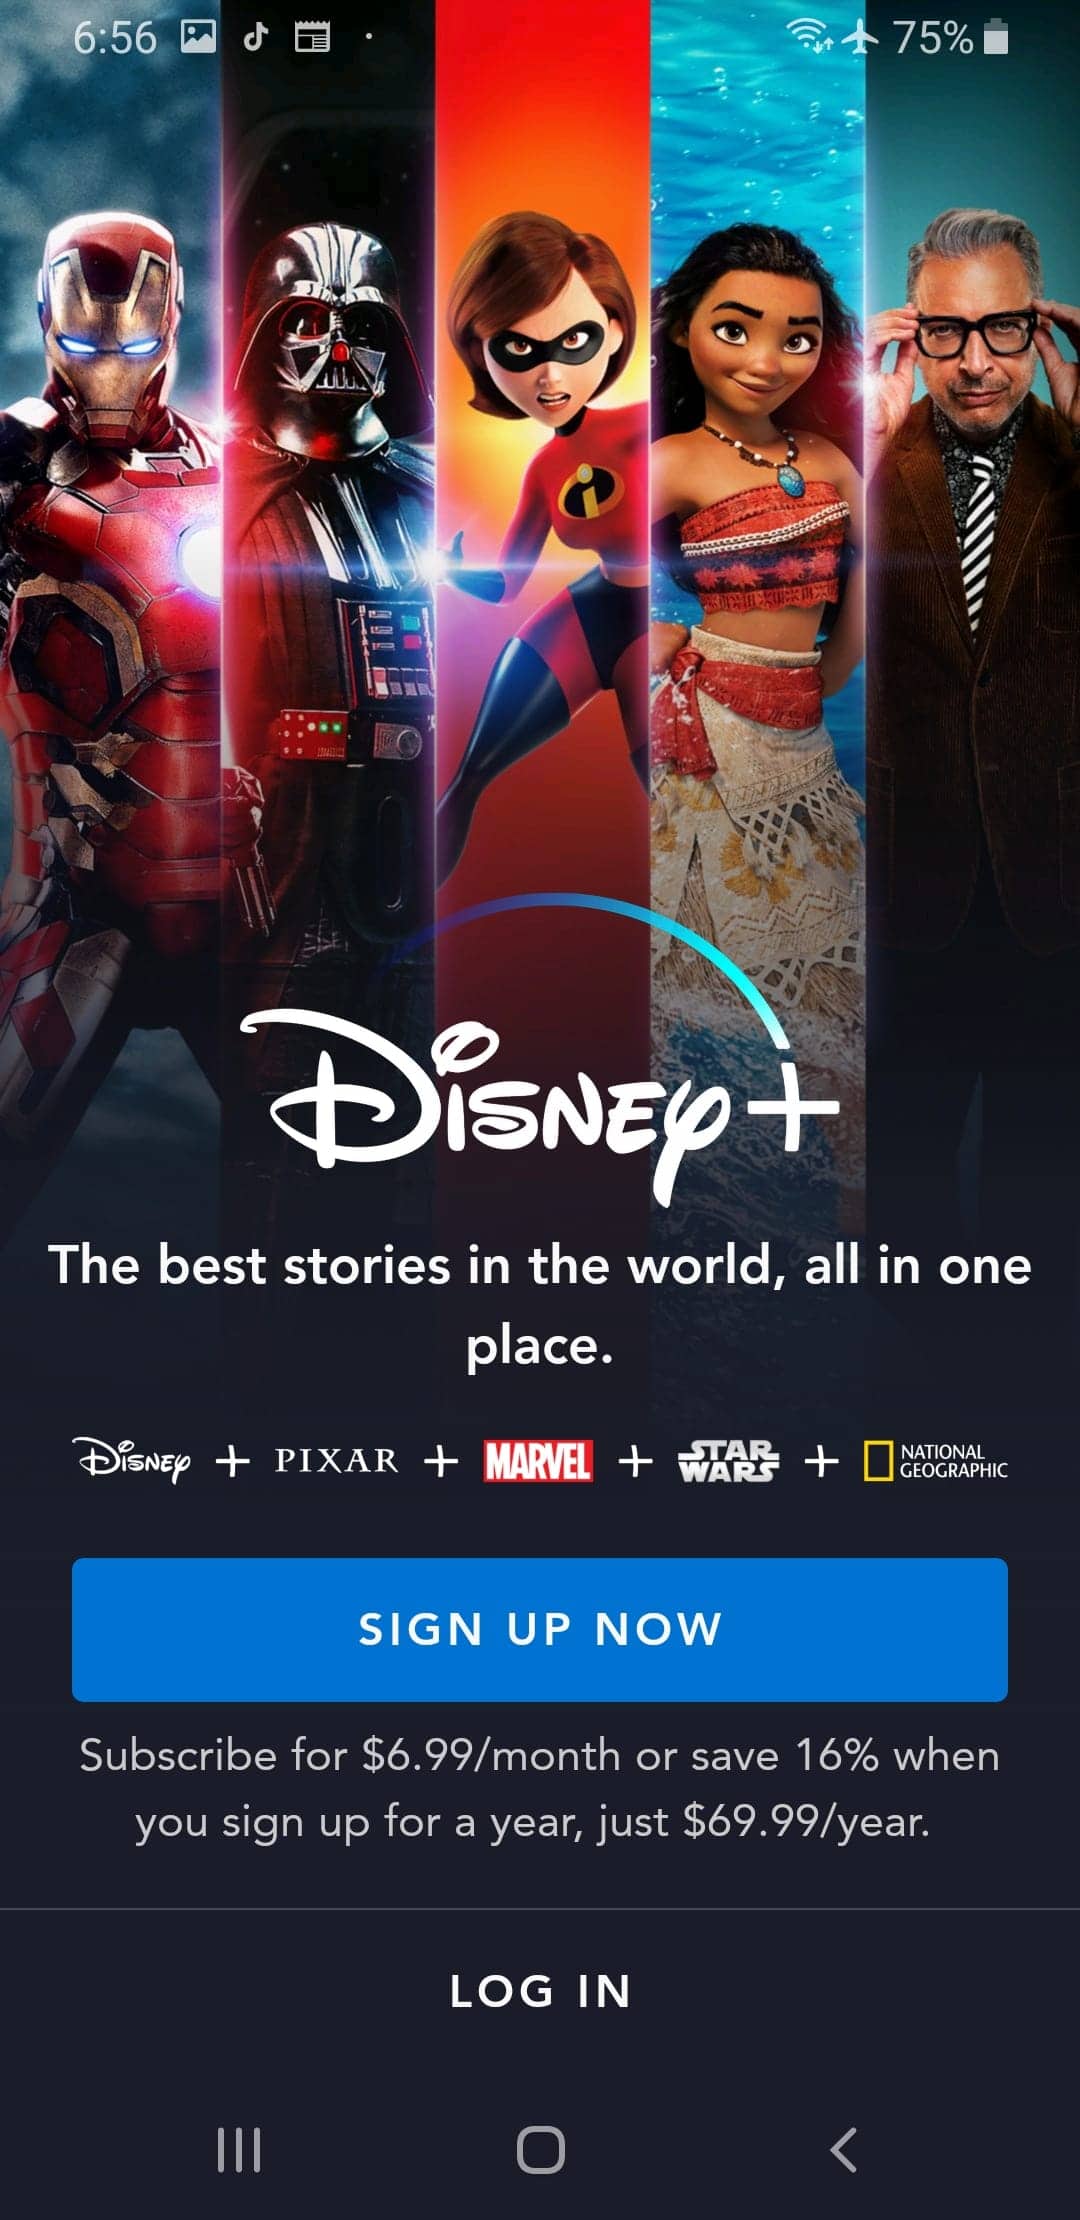 Screenshot From Our Disney+ Review